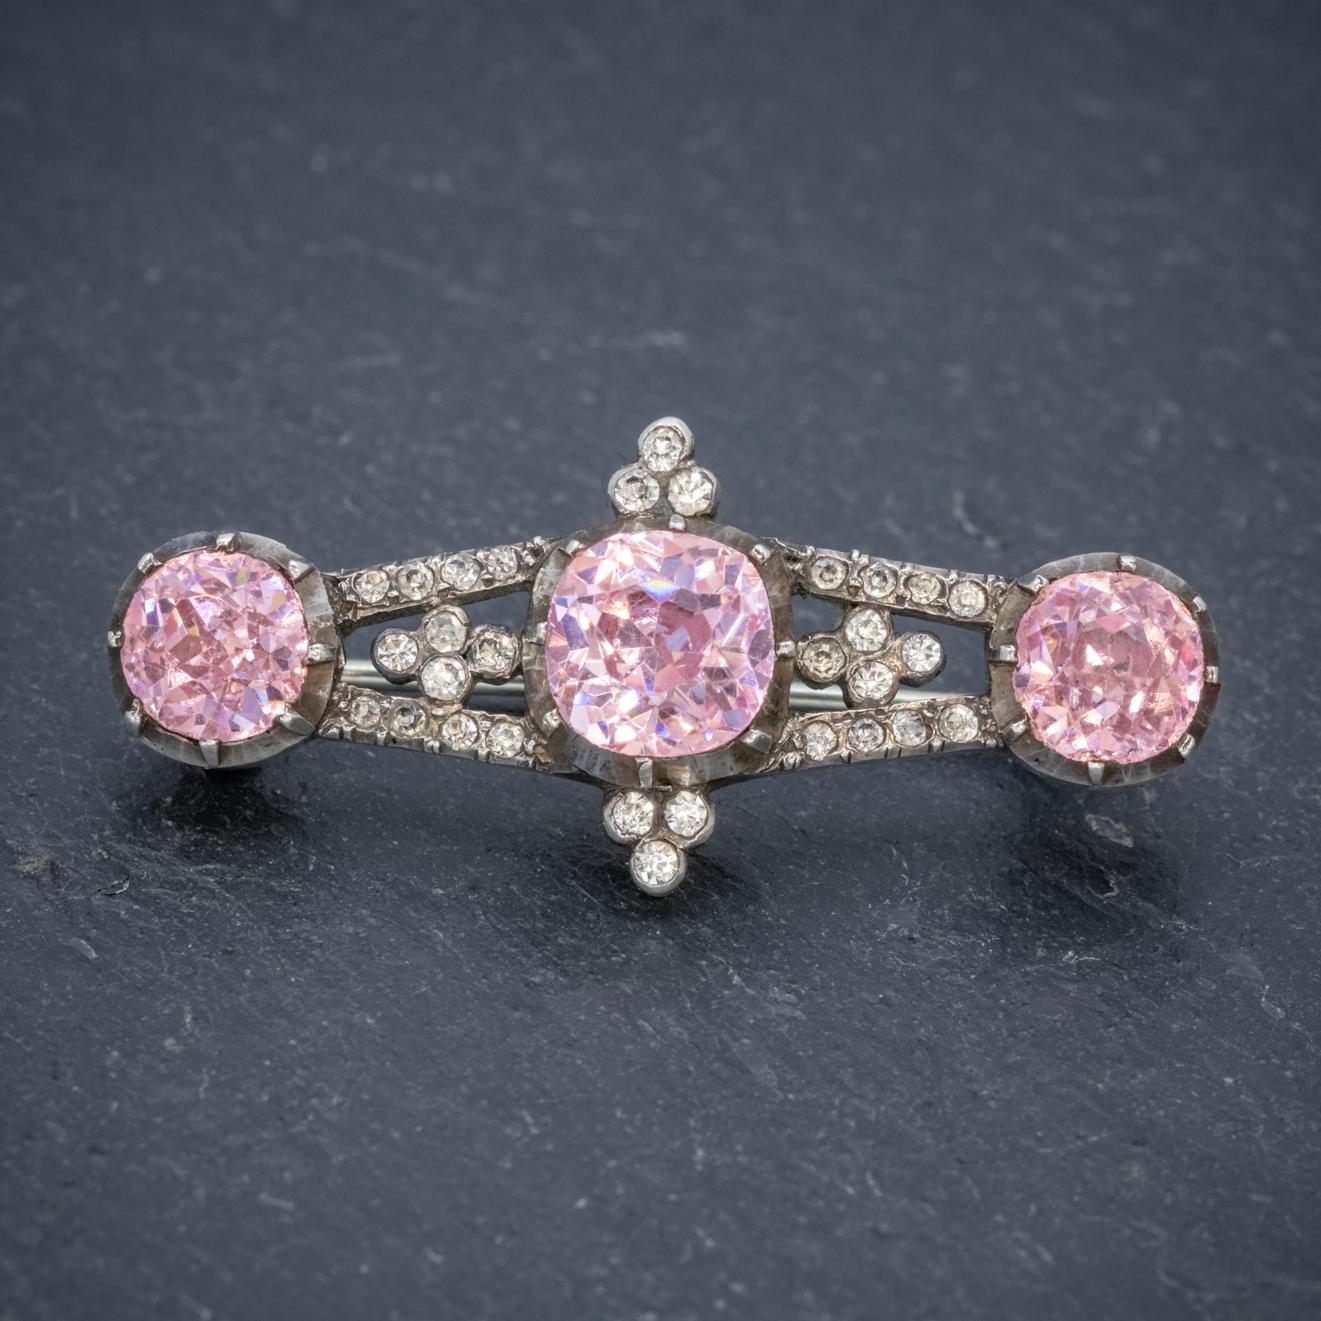 A lovely antique Georgian bar brooch crowned with a trilogy of shimmering pink Paste Stones the largest of which is 2ct in the centre flanked by smaller 1.20ct stones. 

The gallery is modelled in Silver and dotted with smaller white Pastes which